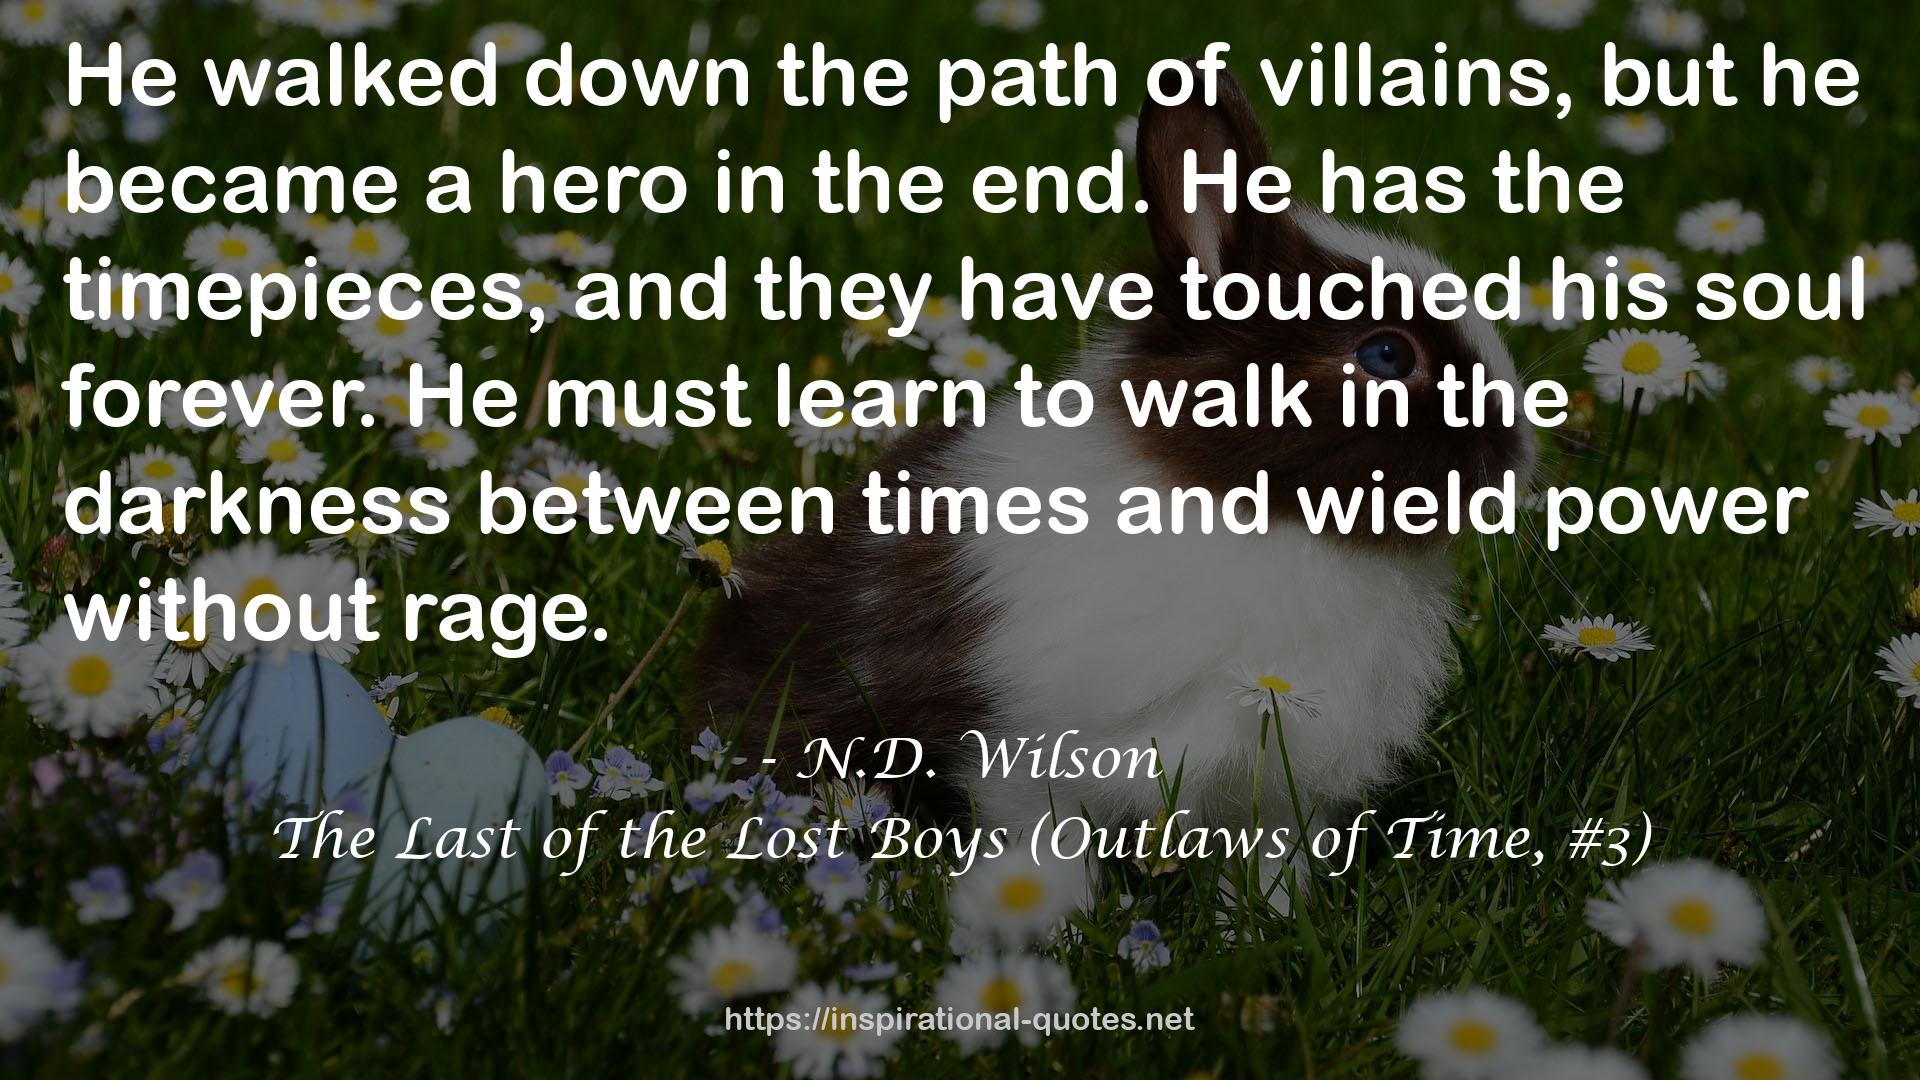 The Last of the Lost Boys (Outlaws of Time, #3) QUOTES